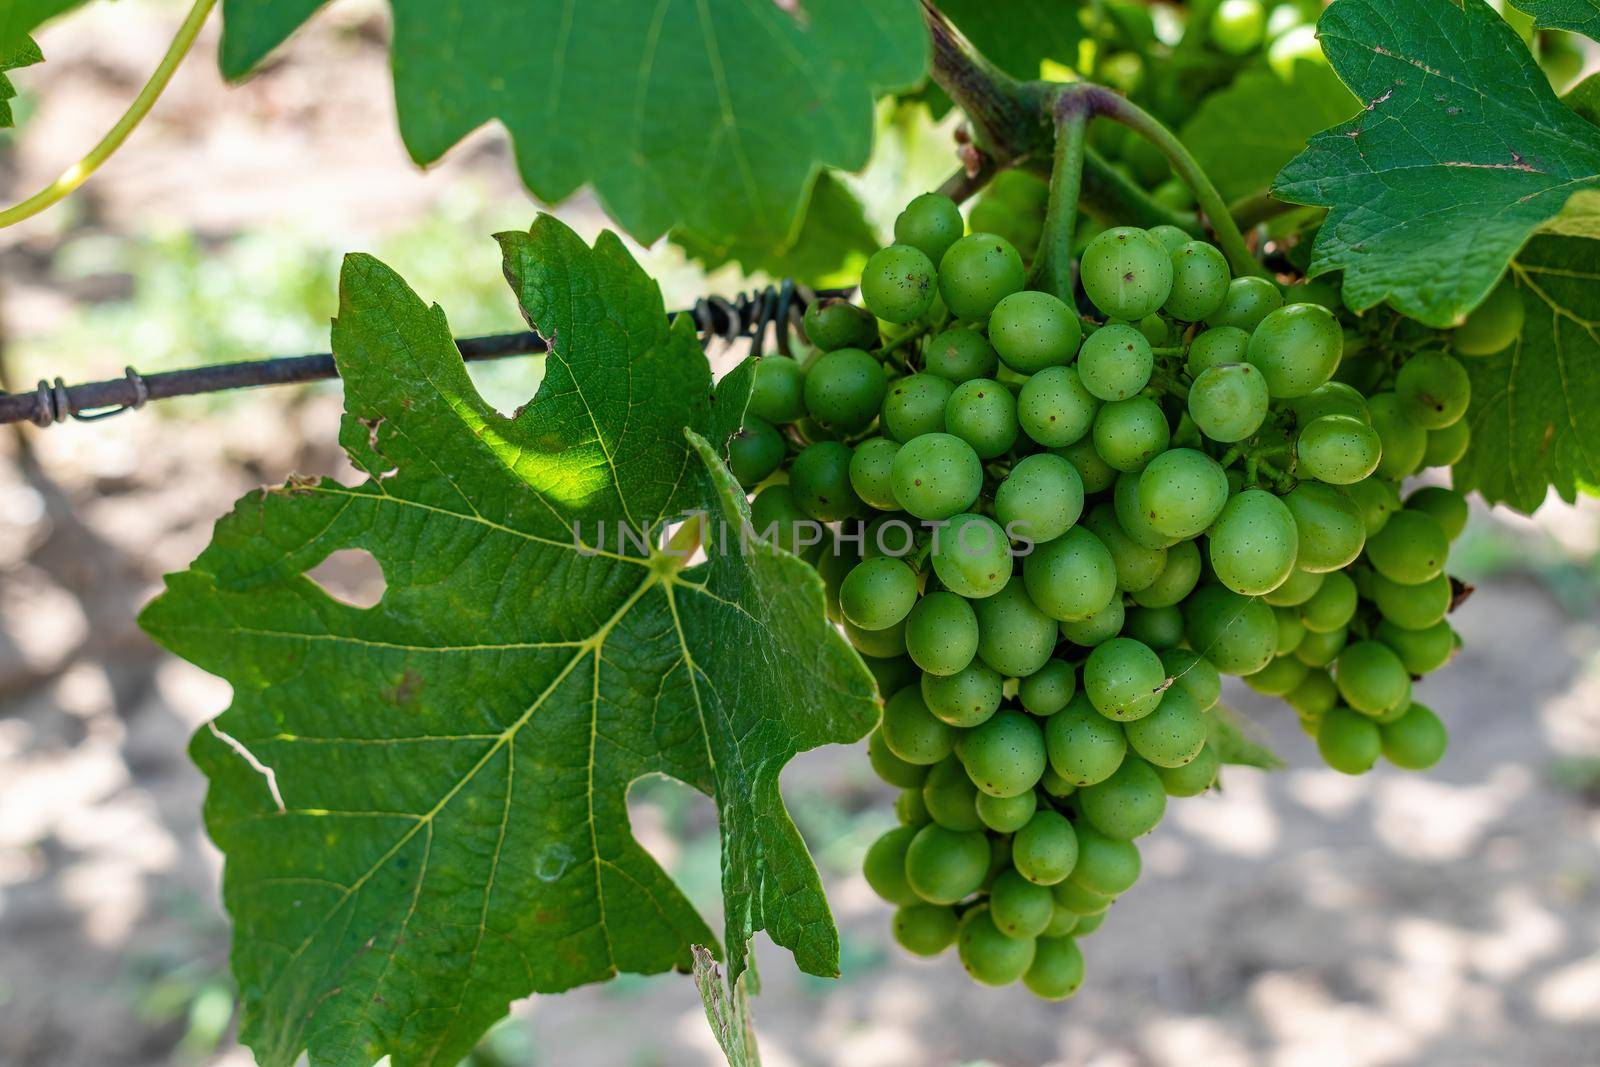 Grape and wine leaves against the background of a gray wall Texture, background for further work.